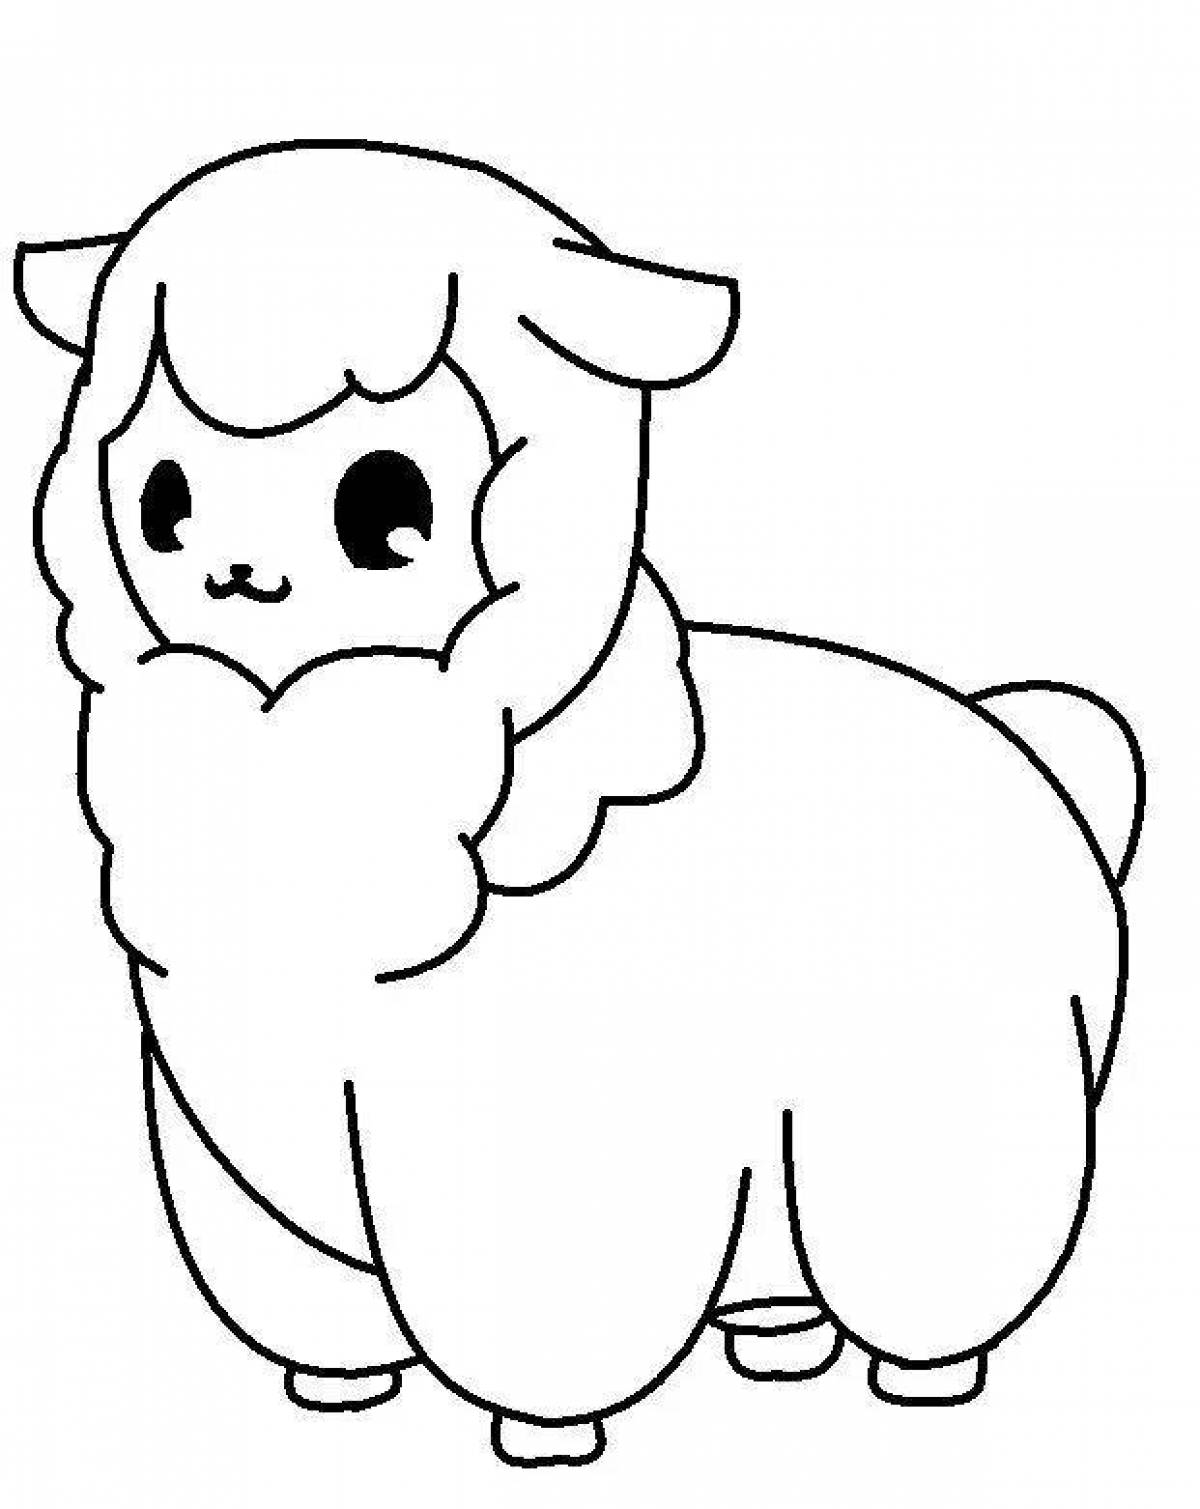 Grinning alpaca coloring page